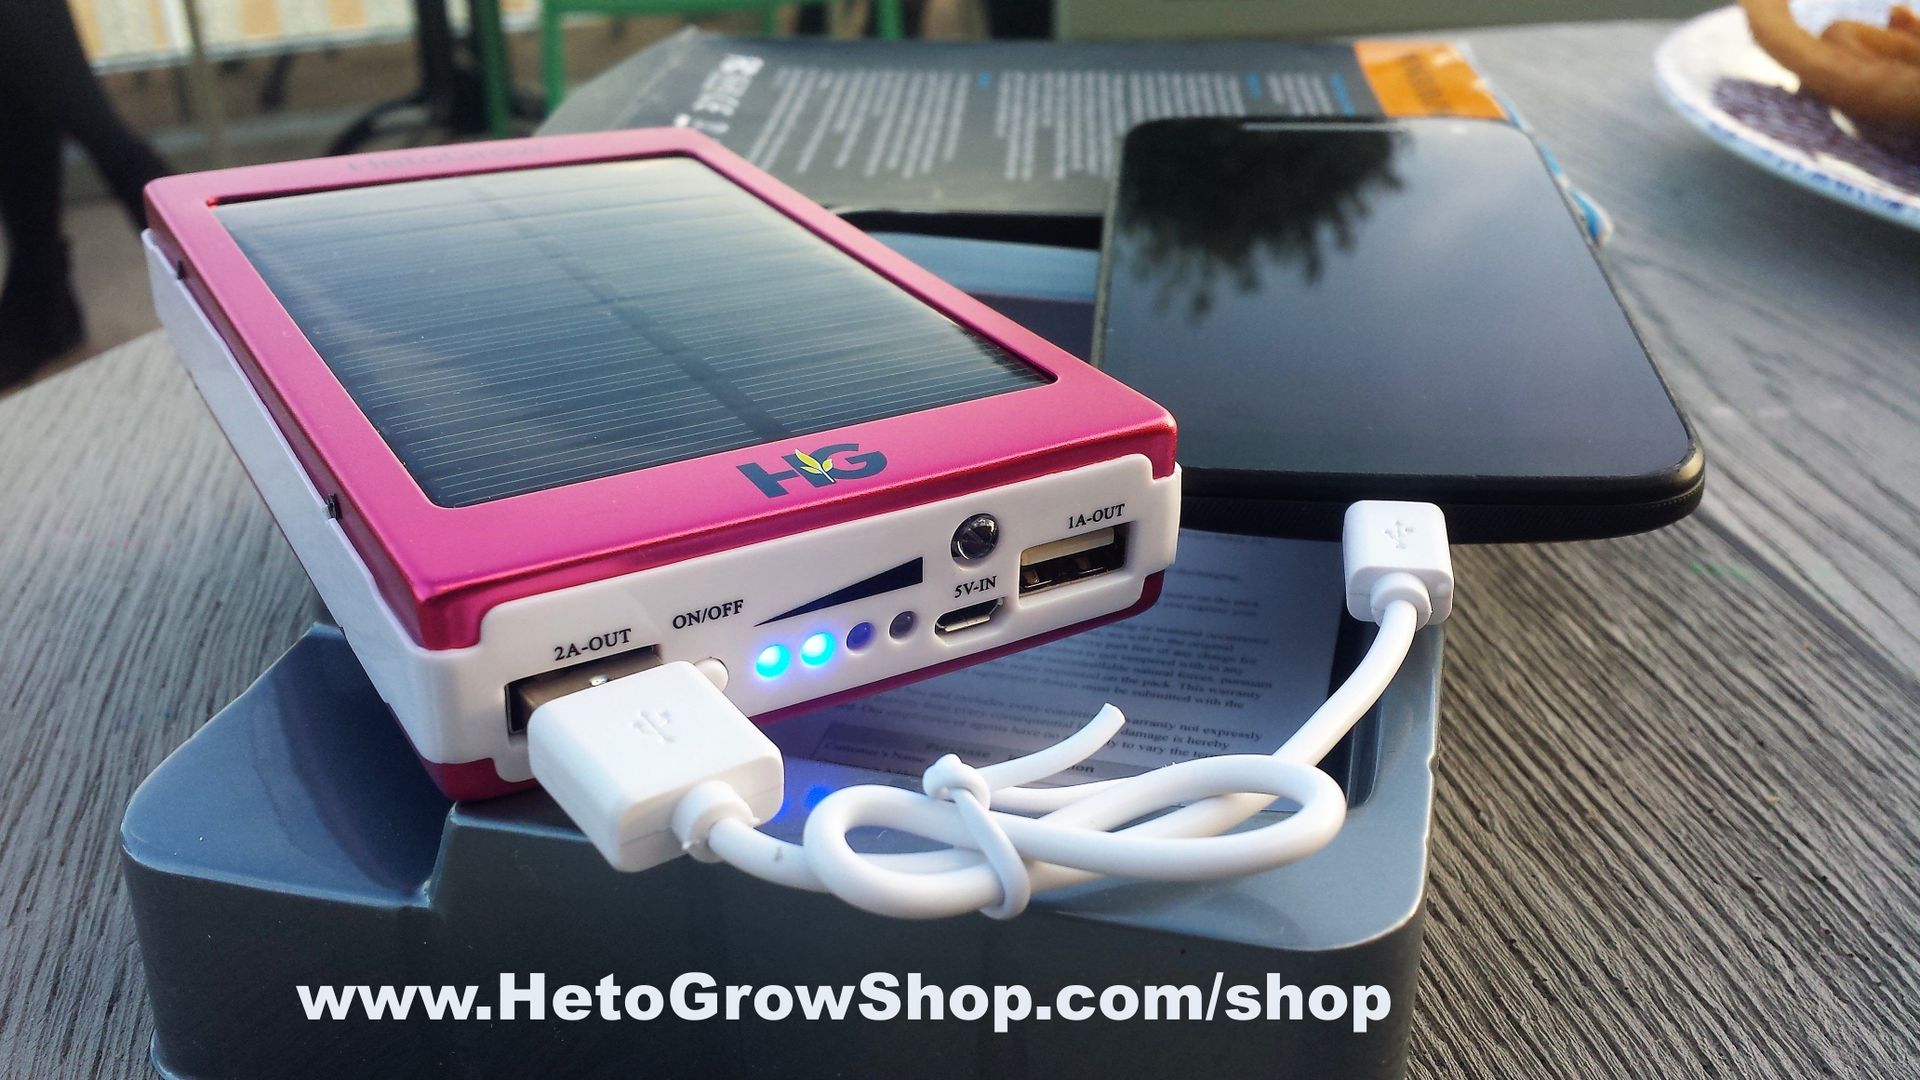 Keep your mobile gadgets powered up with HG solar power bank 10000 mAh www.hetogrowshop.com